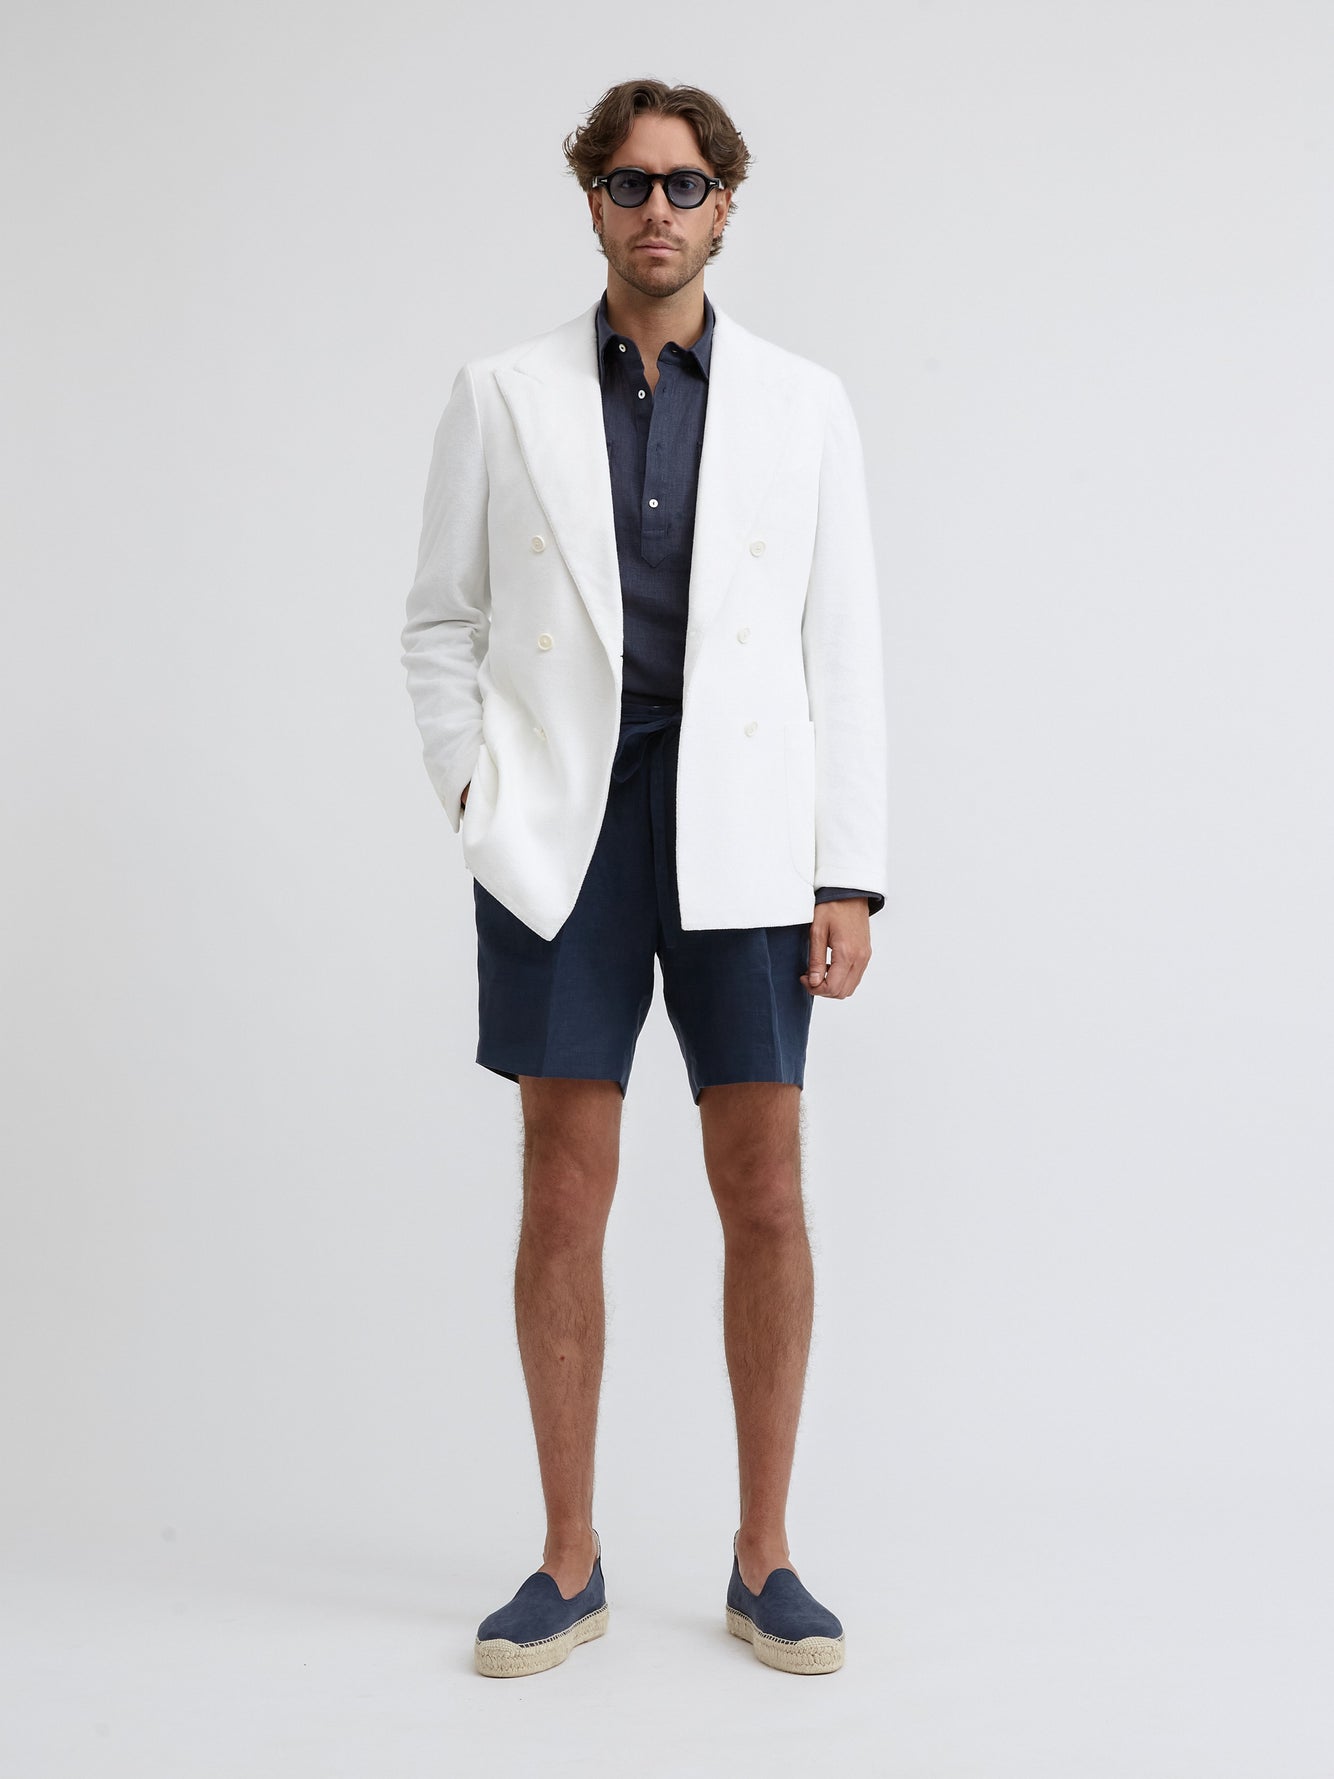 White Terry Towelling Jacket - Grand Le Mar